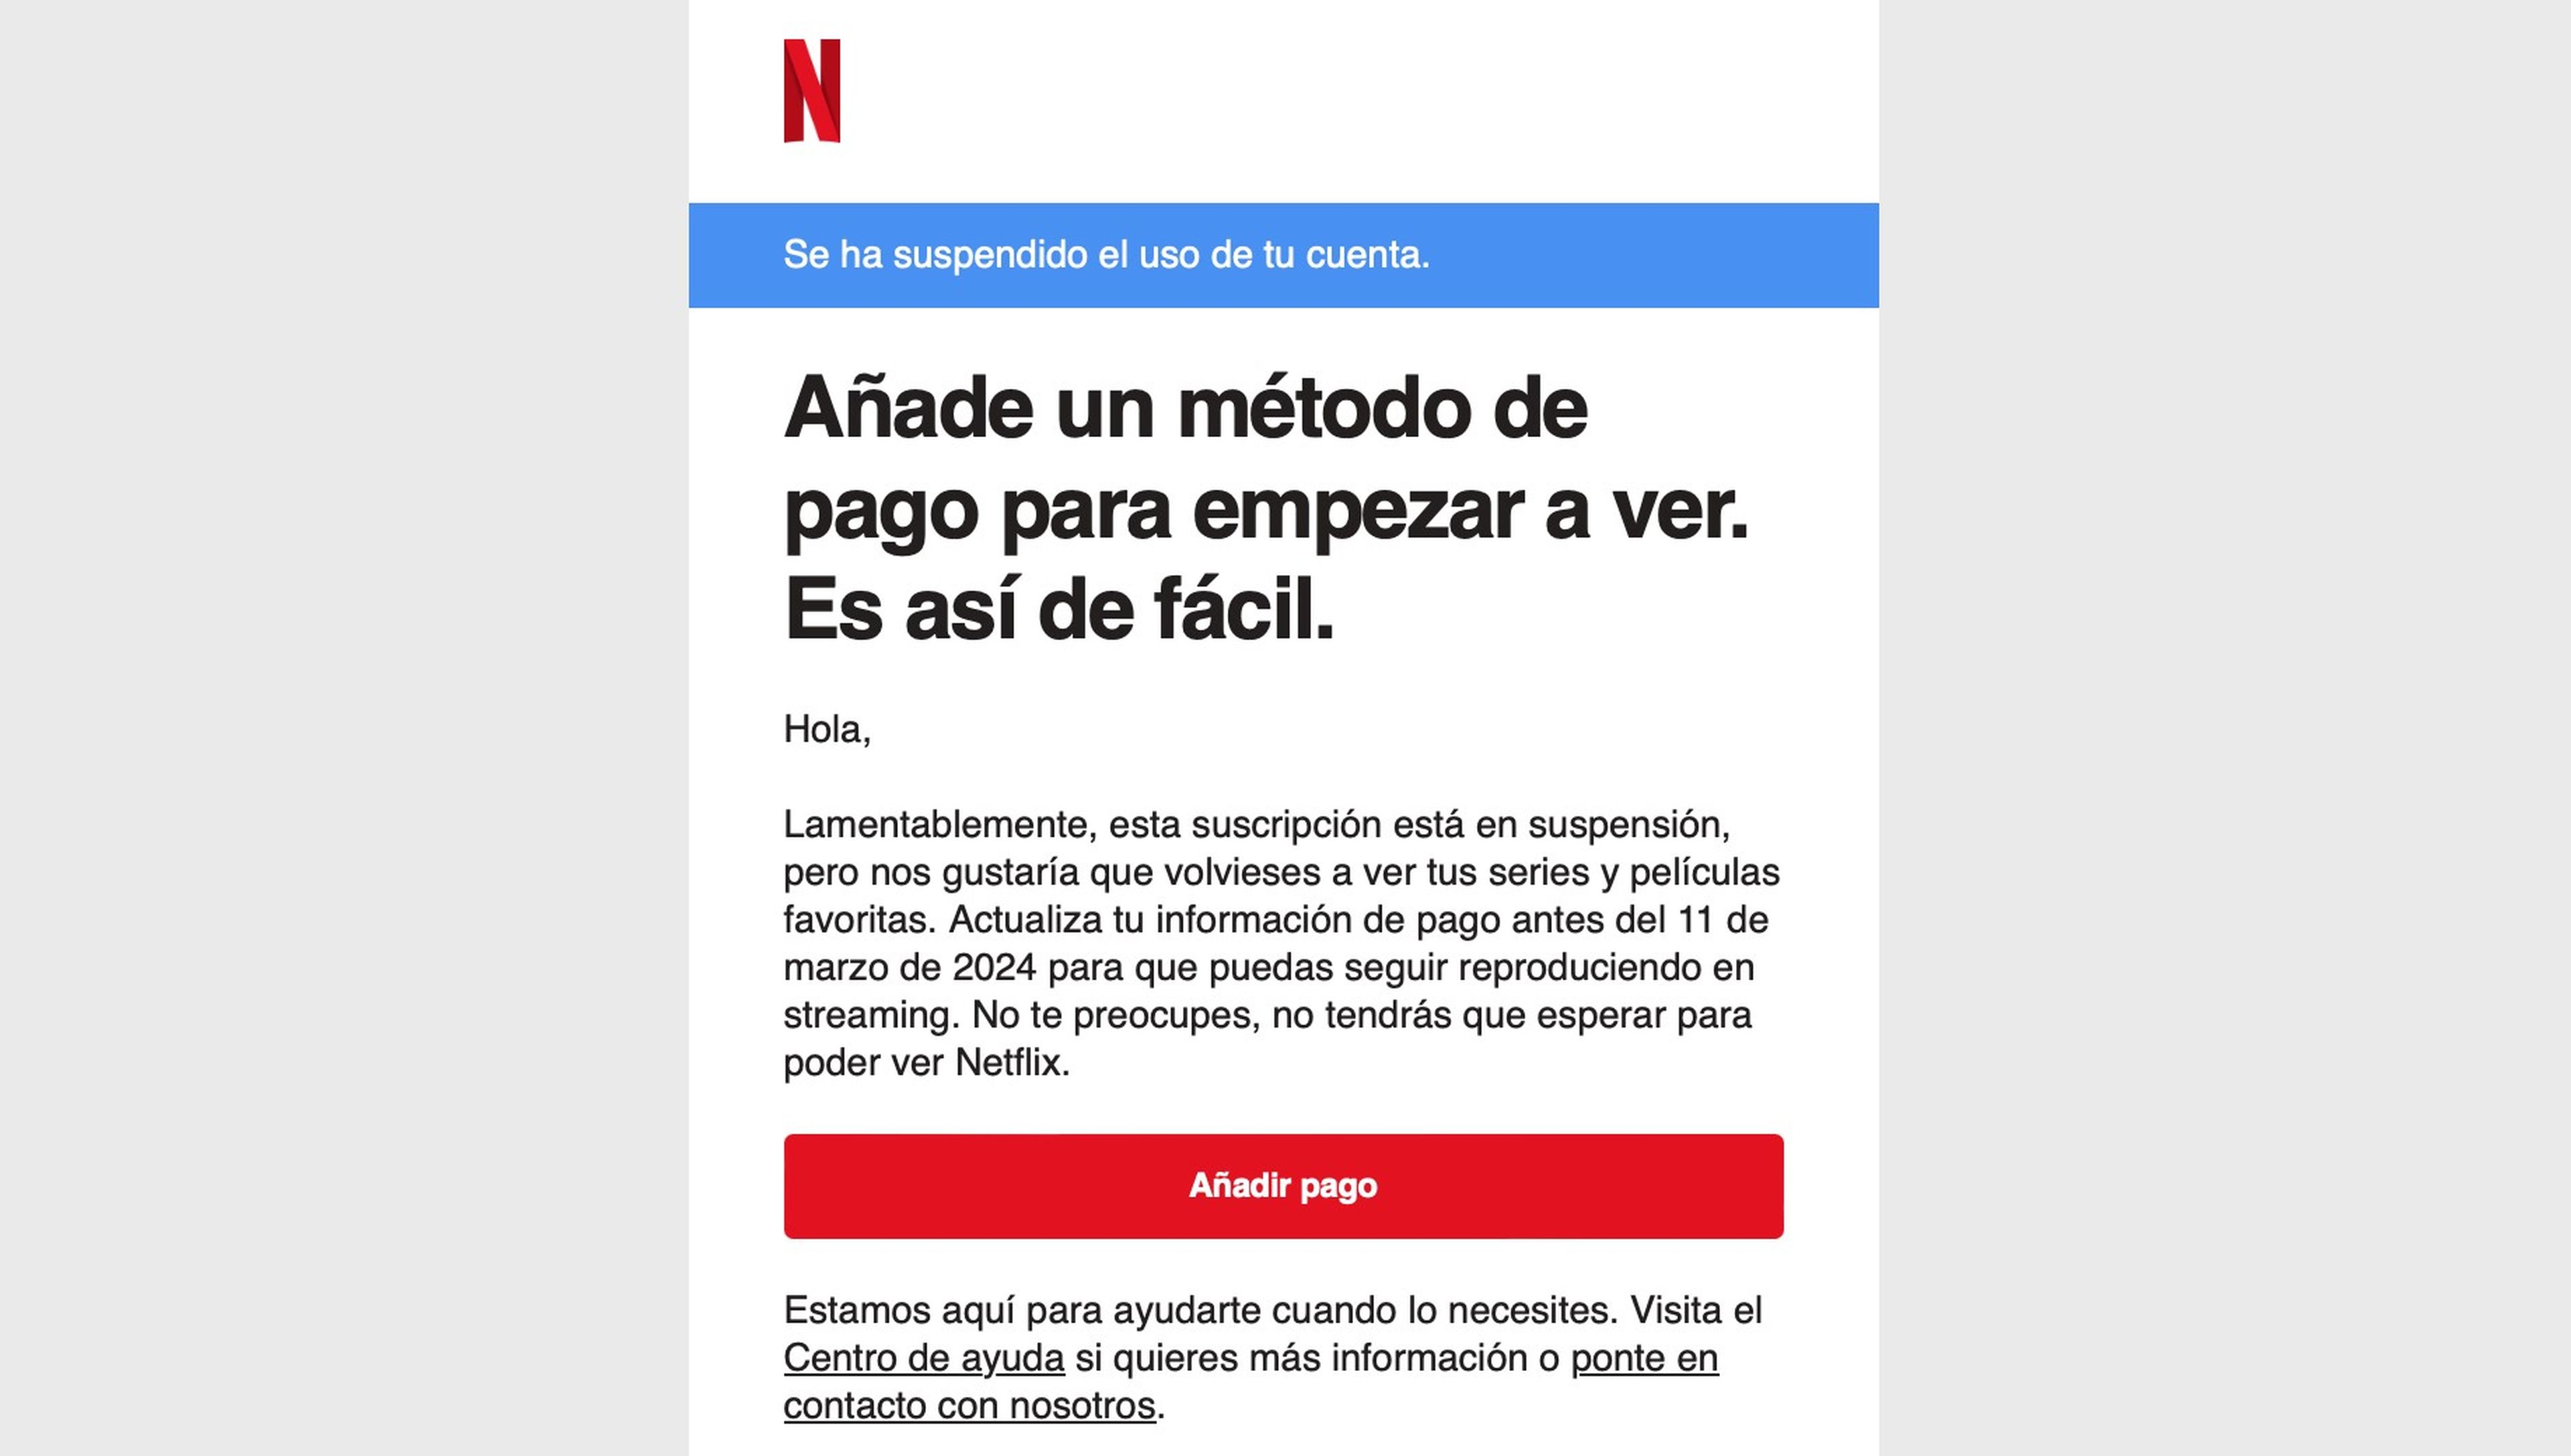 Goodbye to cheap Netflix in Spain